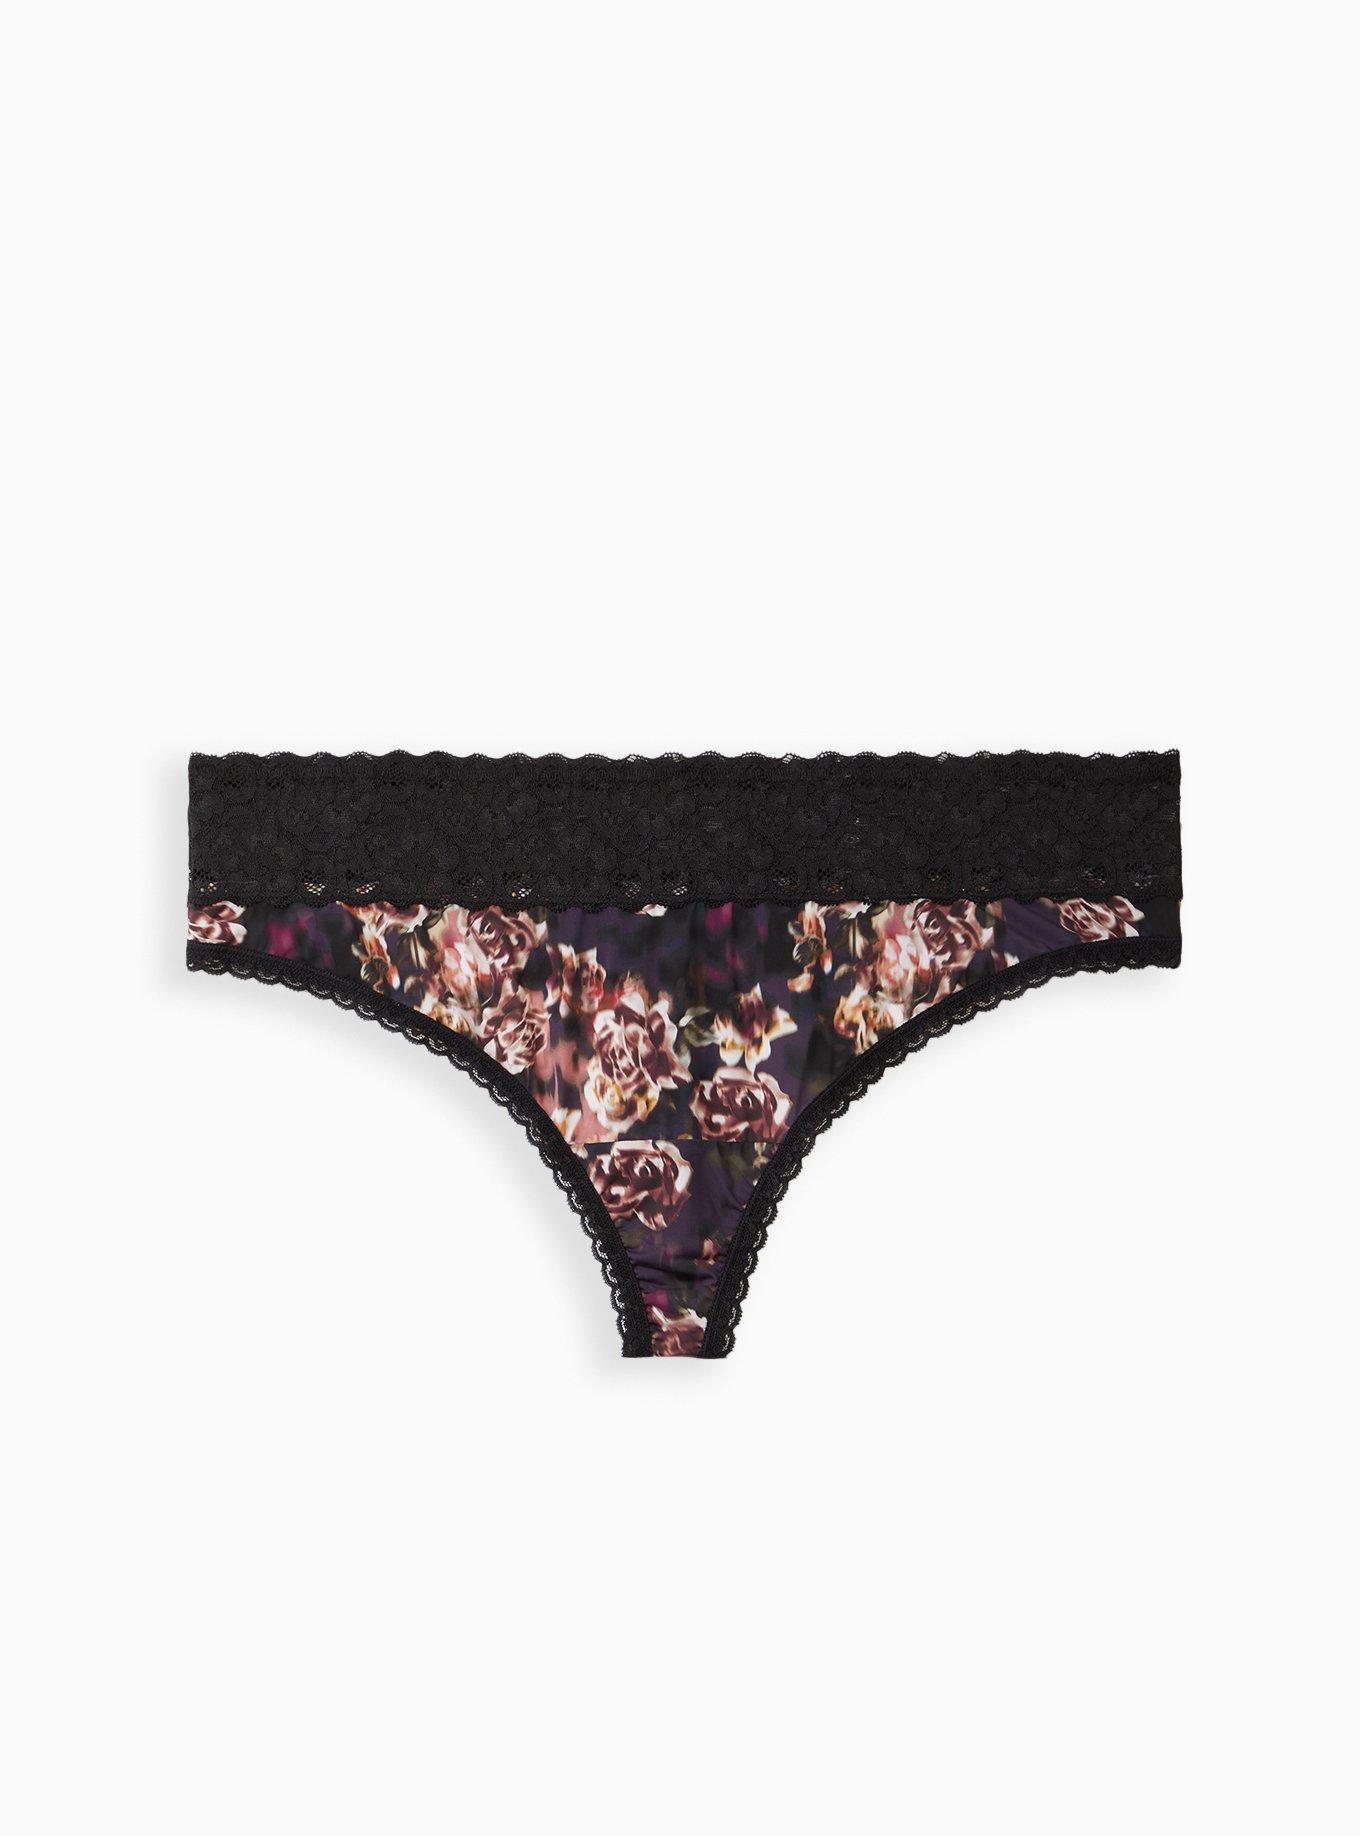 Do plus size little undies exist? I'm looking for really cute little space  undies but I cant find any in my size since they're girls! I wear a size XL  on bottom